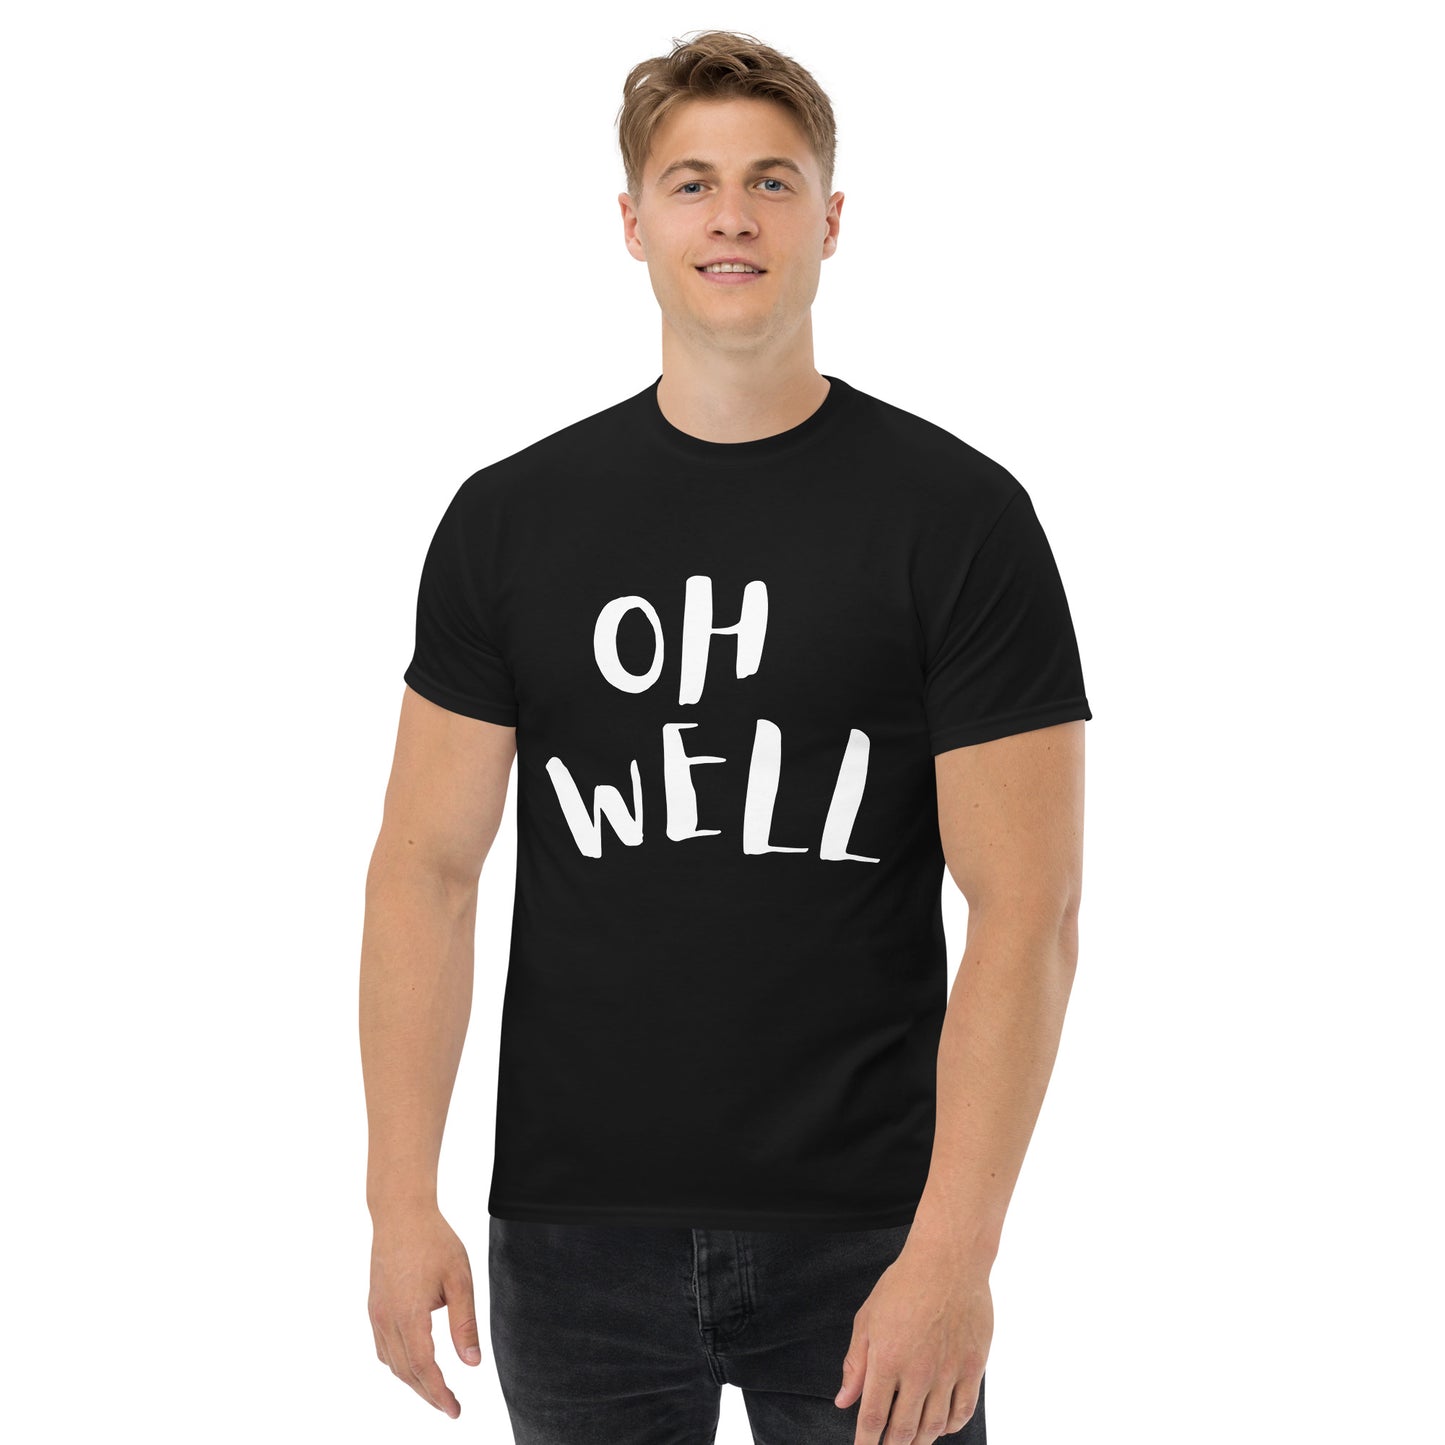 OH WELL T-shirt